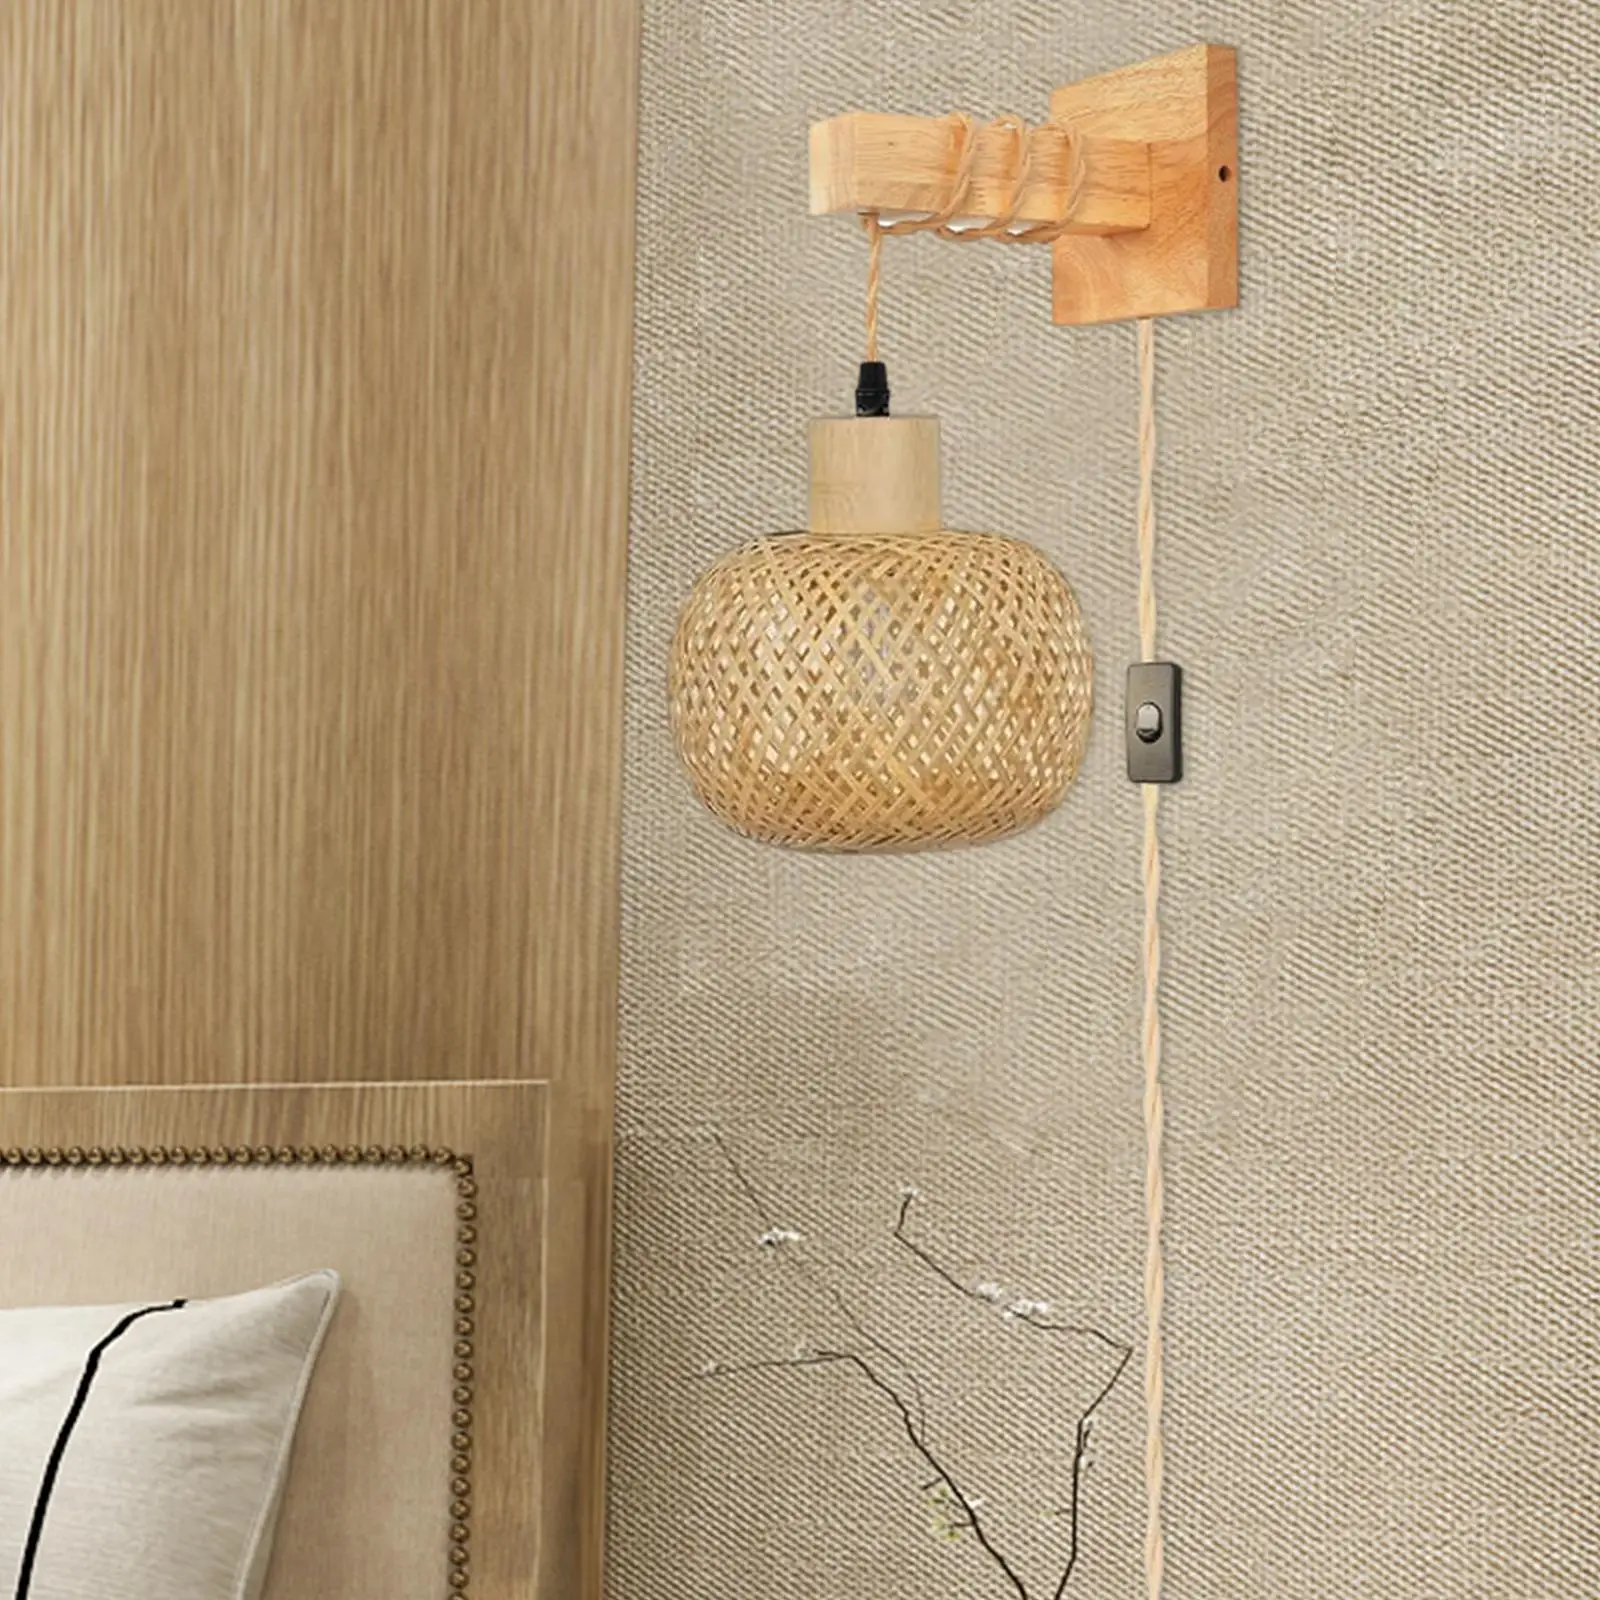 Bamboo Wall Sconce Hand Woven Wall Mount Sconce E26 Base Bathroom Vanity Wall Light for Bedroom Bathroom Kitchen Home Hallway